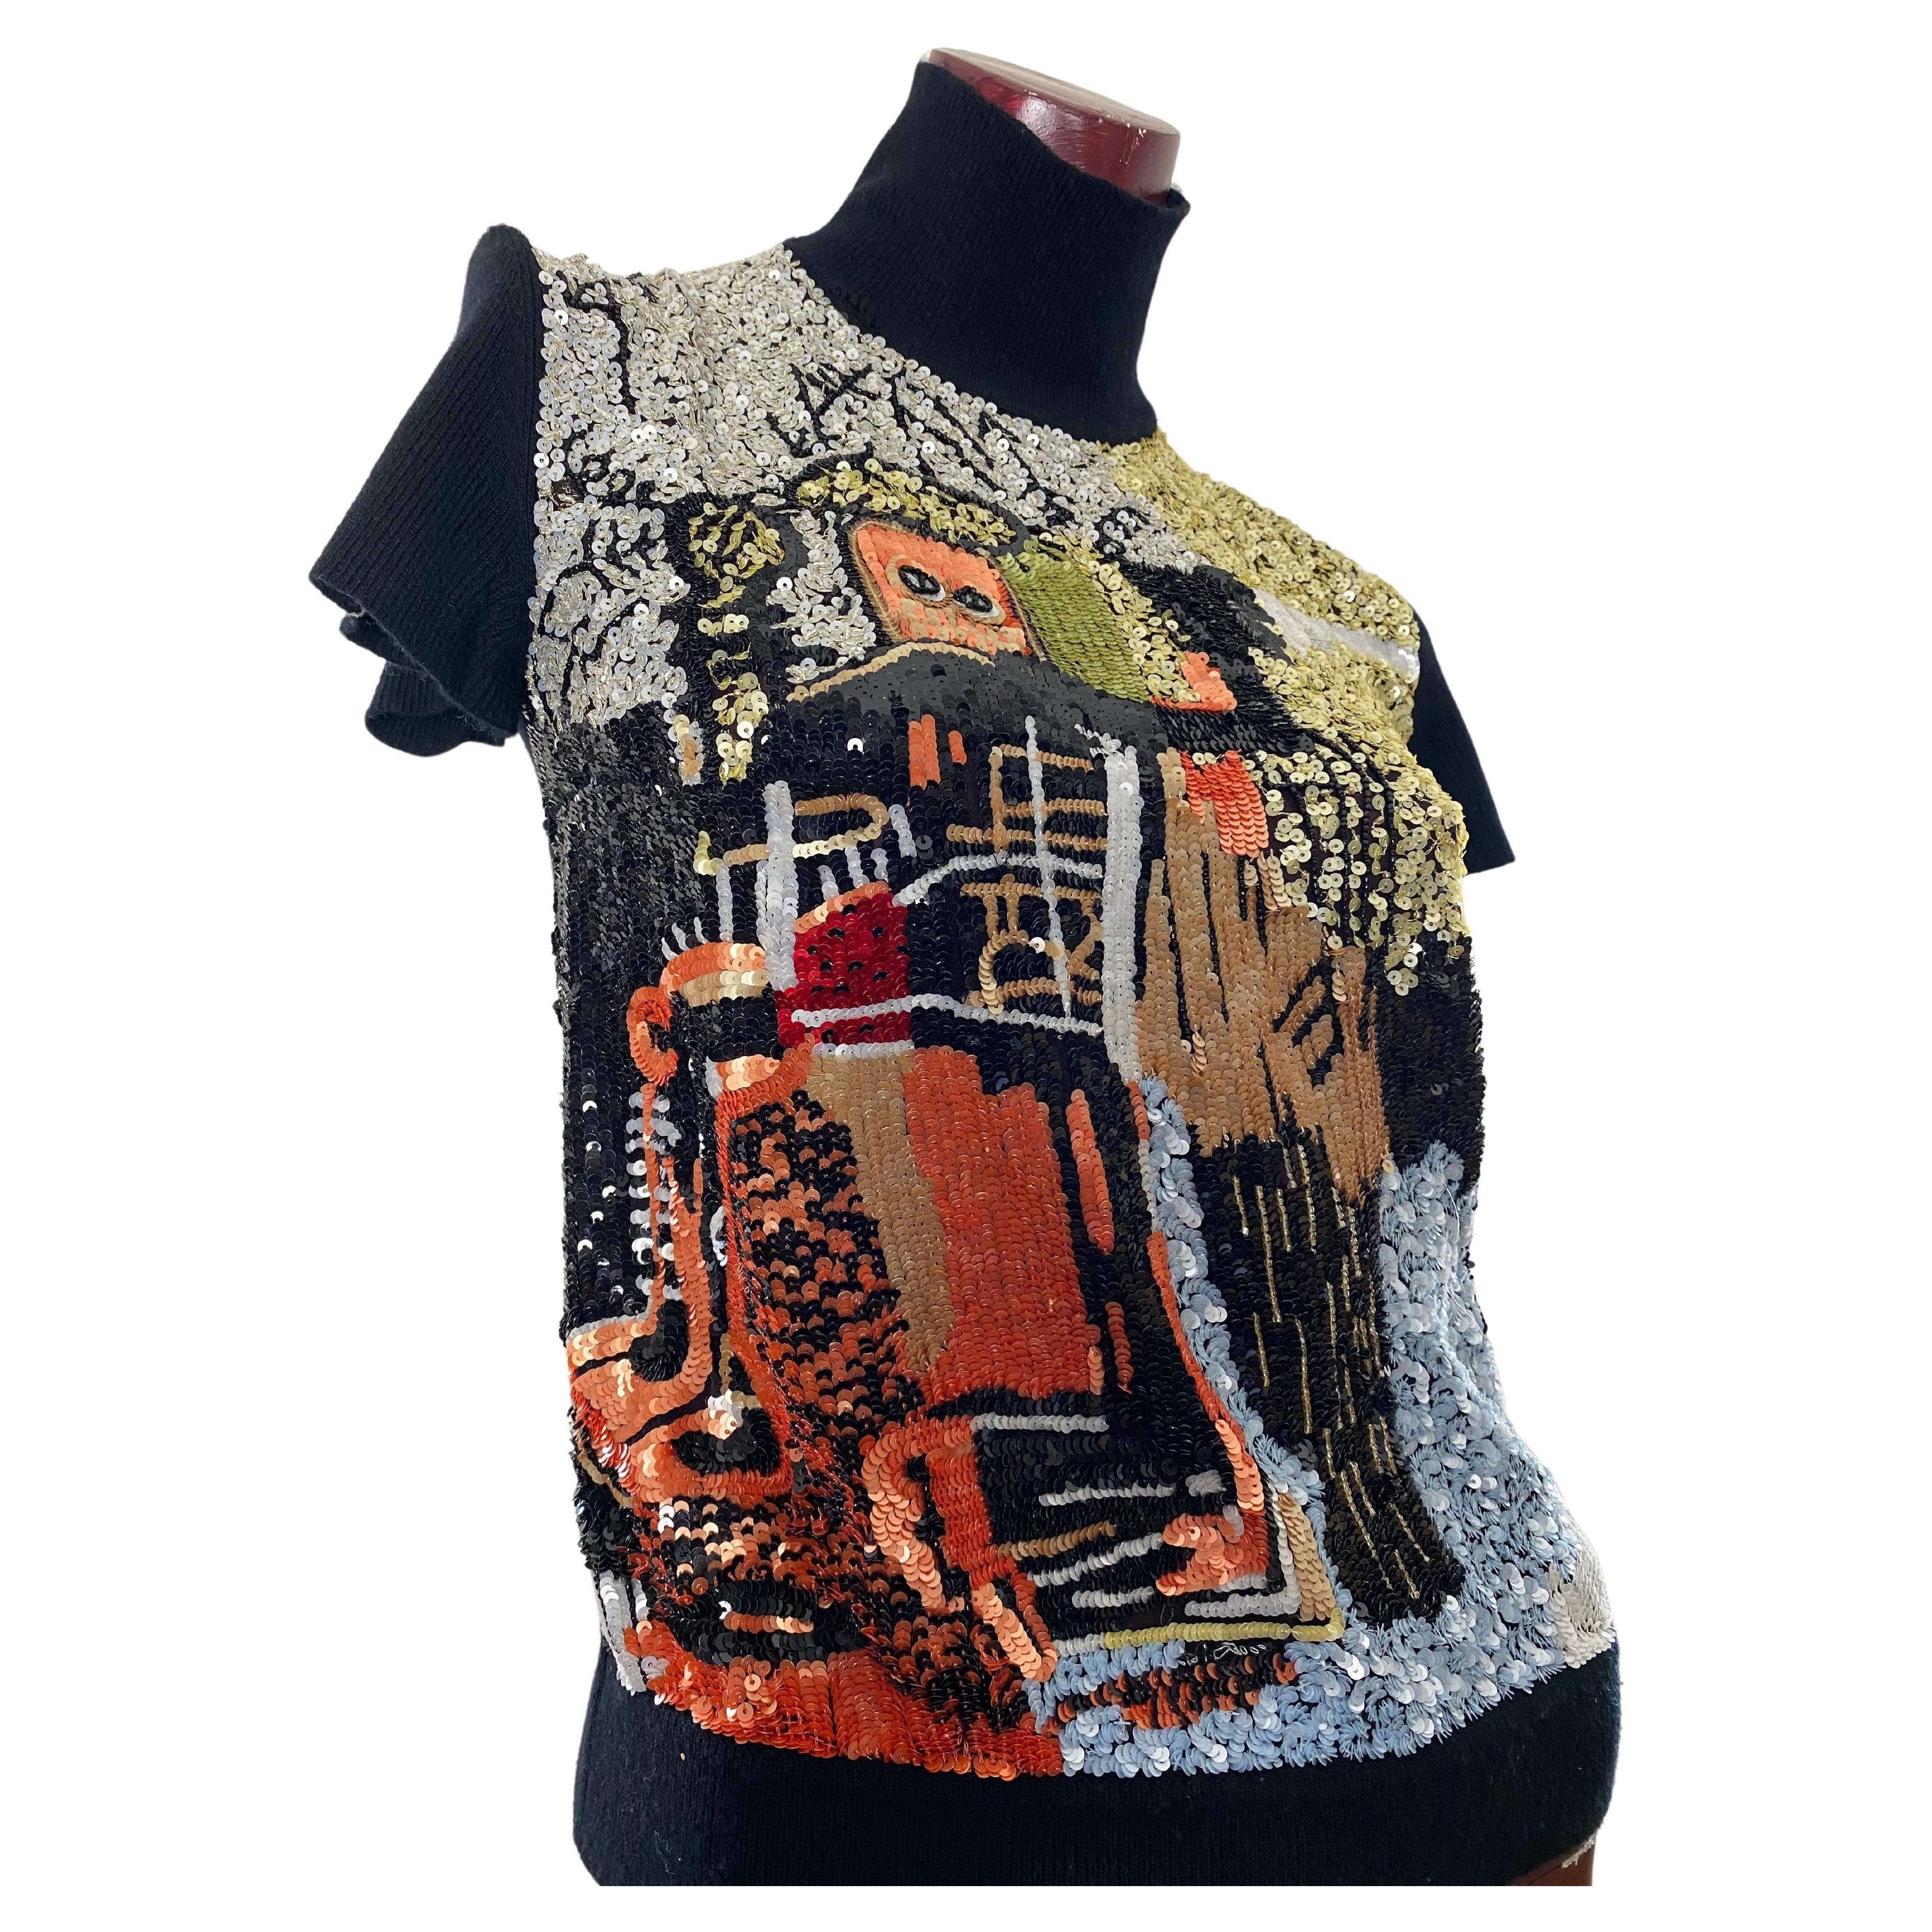 Valentino turtleneck with wonderful pailletes embroidery Basquiat picture